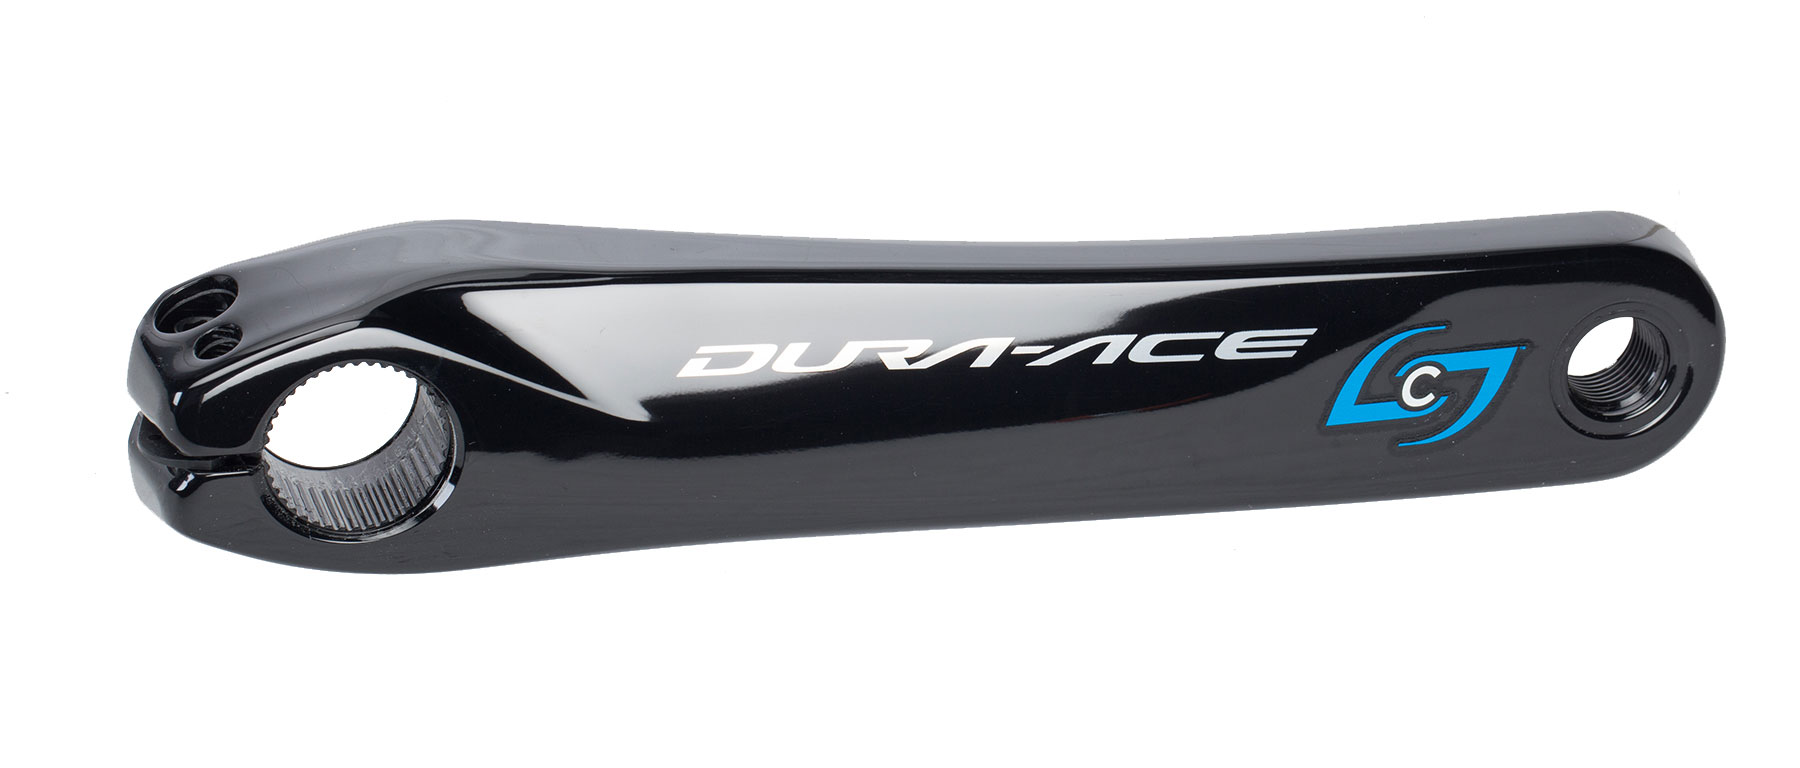 Stages Power L Dura-Ace R9100 Meter